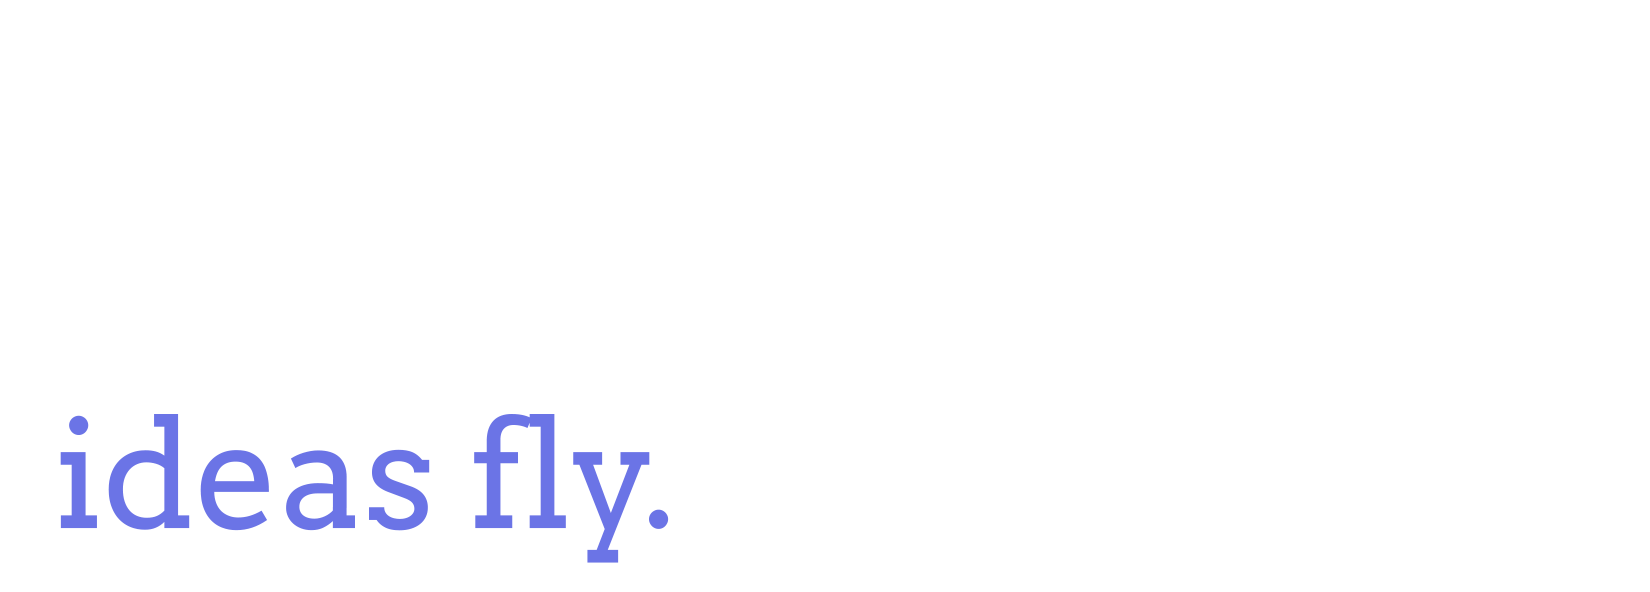 In a Vacuum, there is no friction - ideas fly.